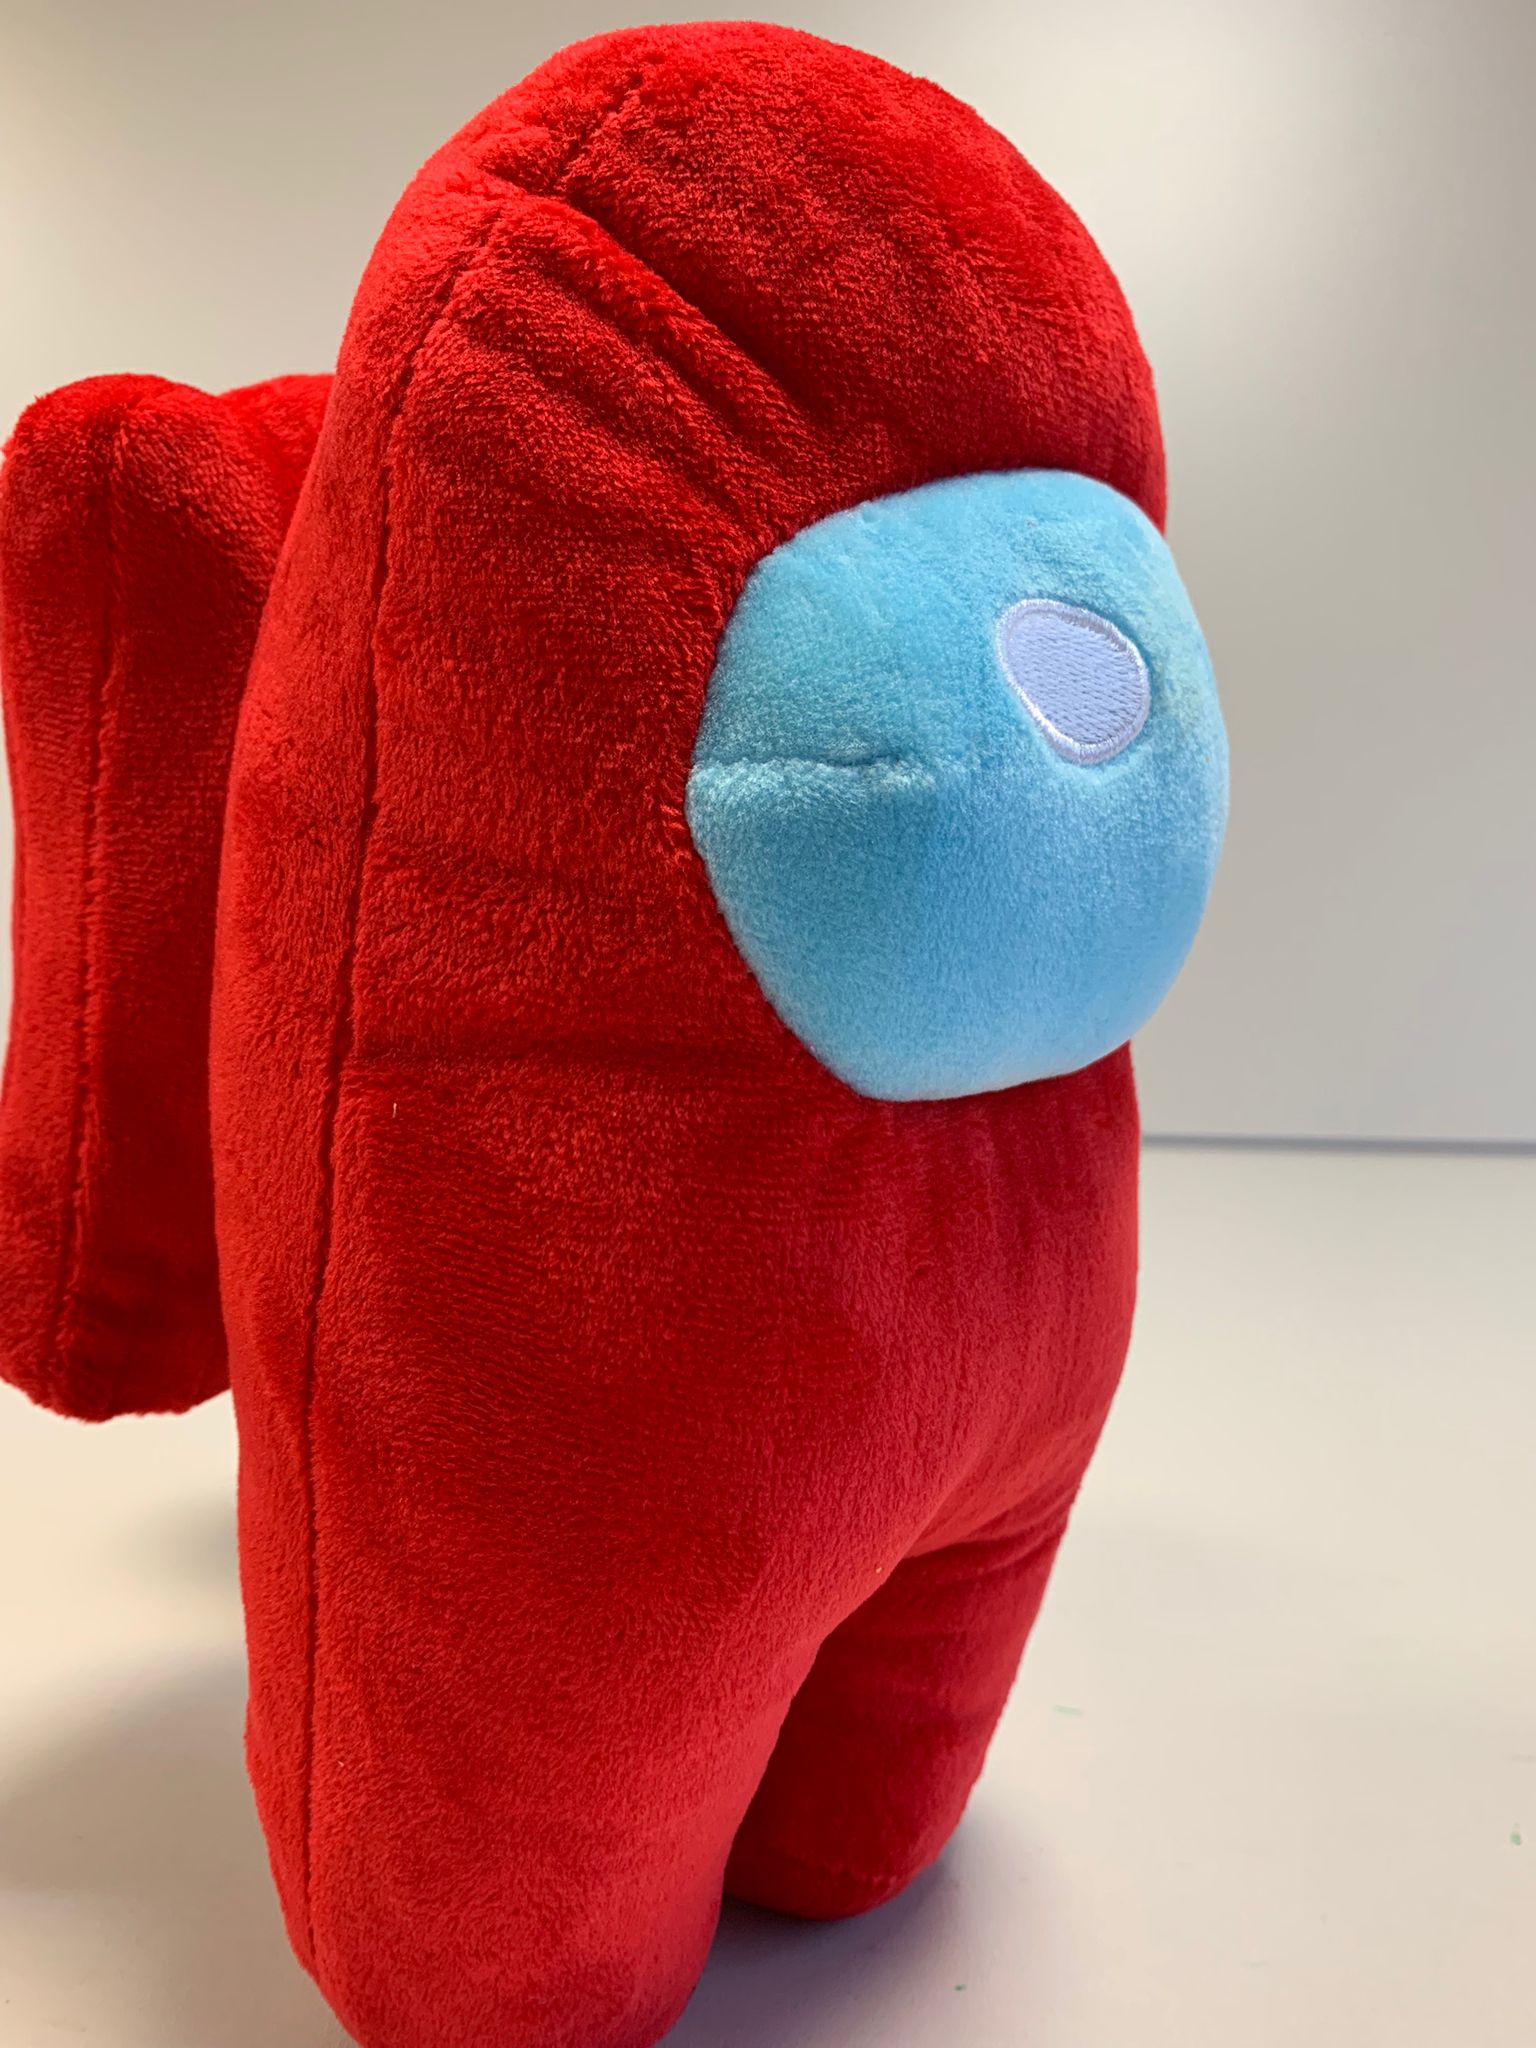 Plush character from the game Among Us, small, red